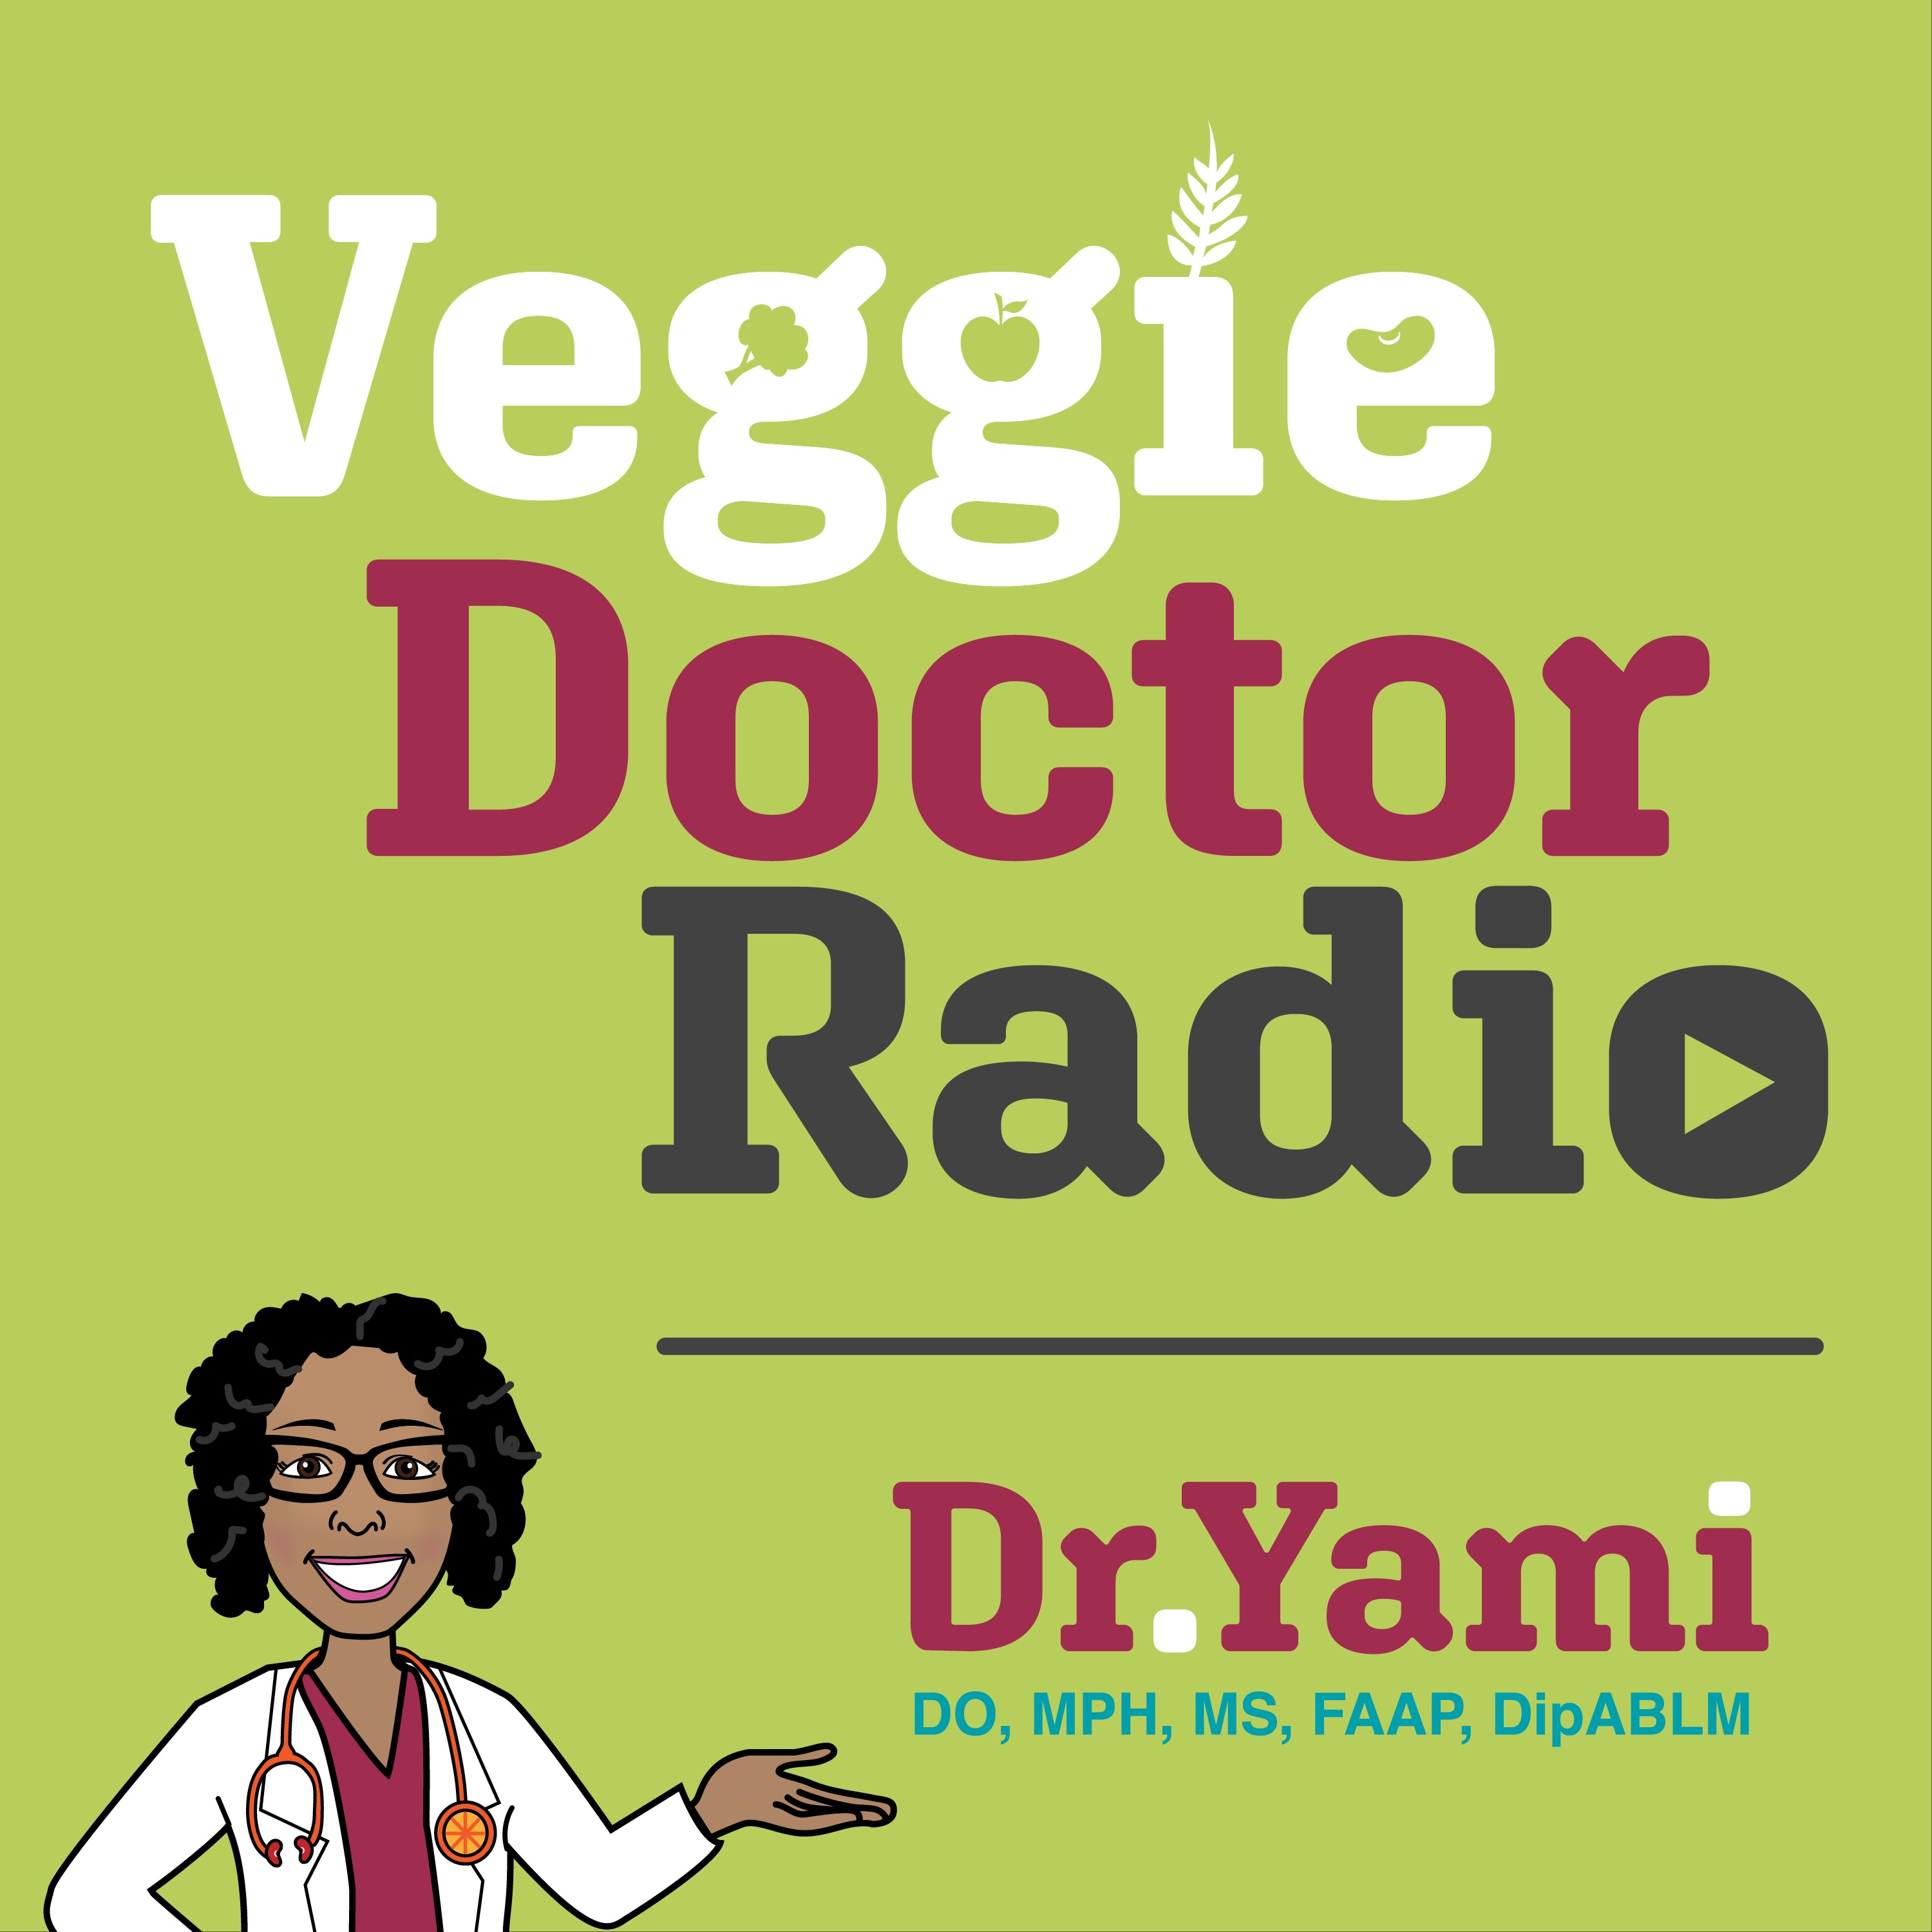 166: Why you should be eating leafy greens (Veggie Doctor Radio)